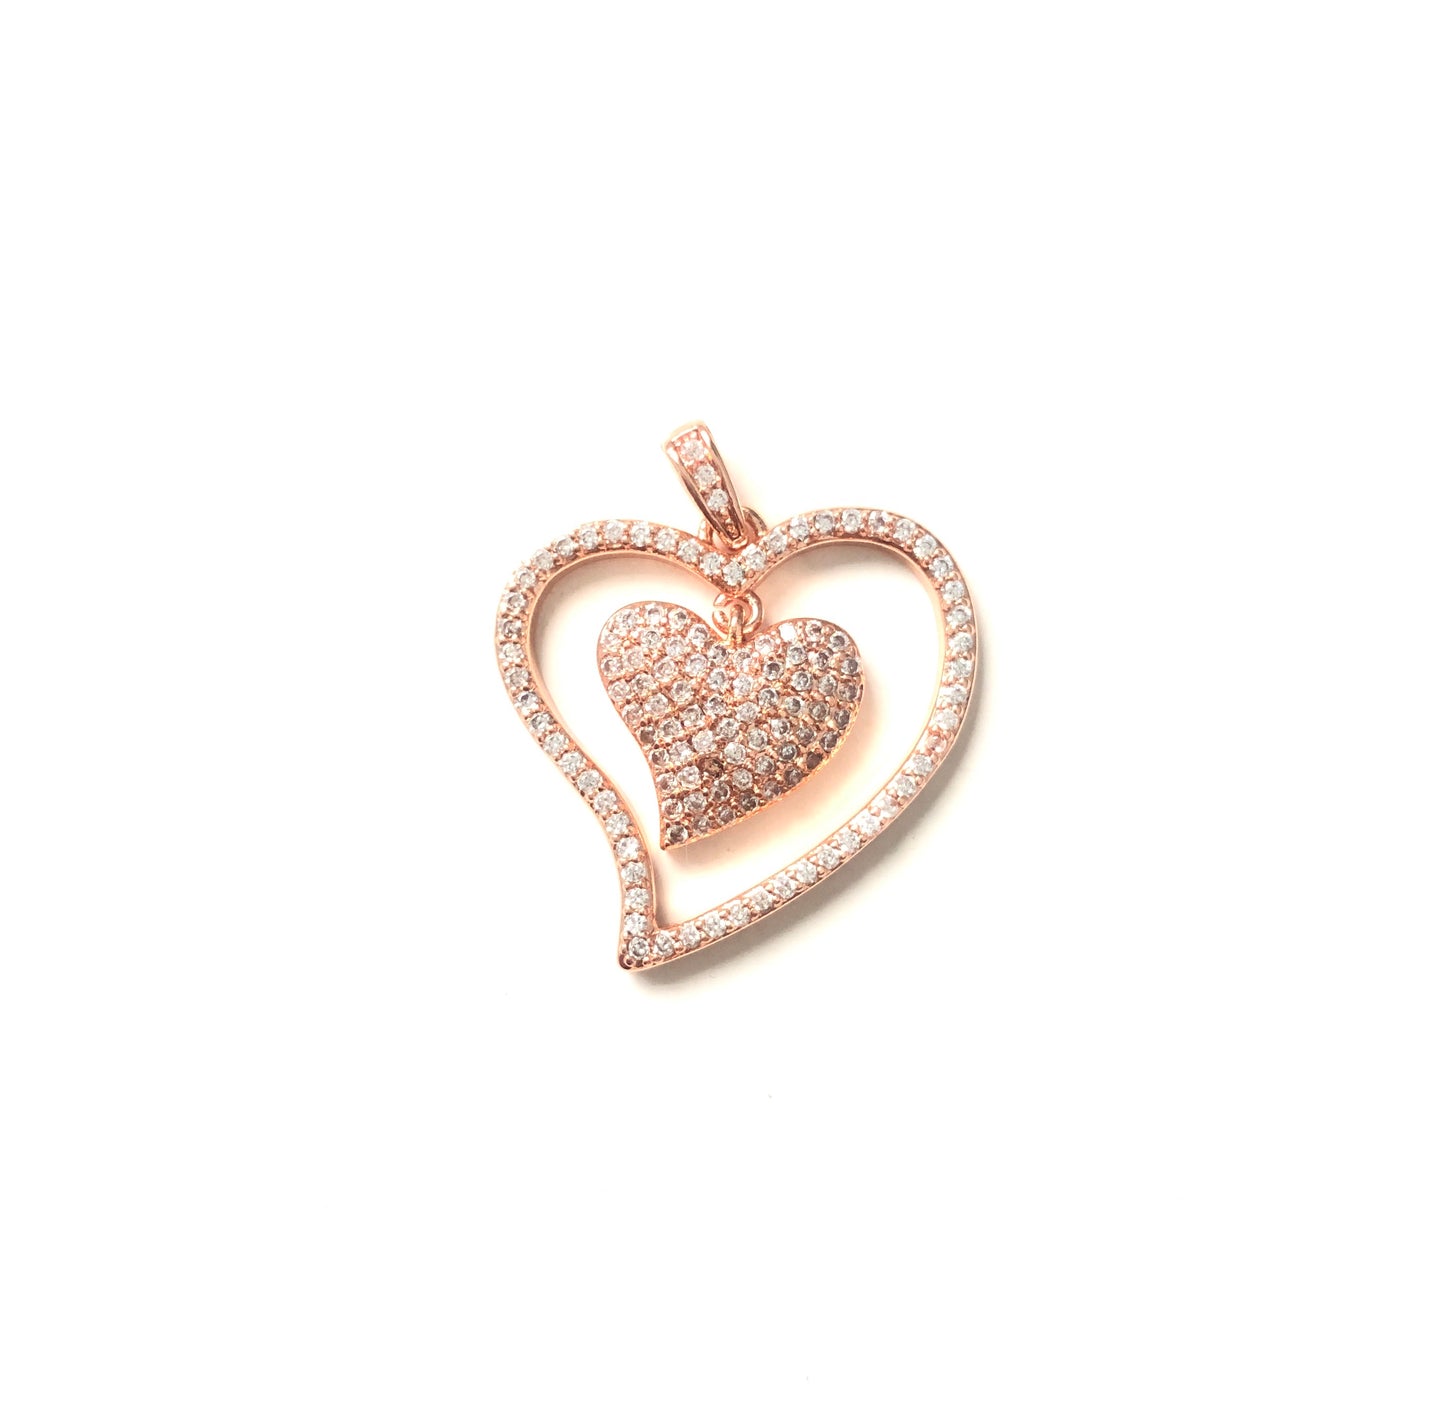 10pcs/lot 25.5*24mm CZ Paved Double Heart Charms Rose Gold CZ Paved Charms Hearts On Sale Charms Beads Beyond